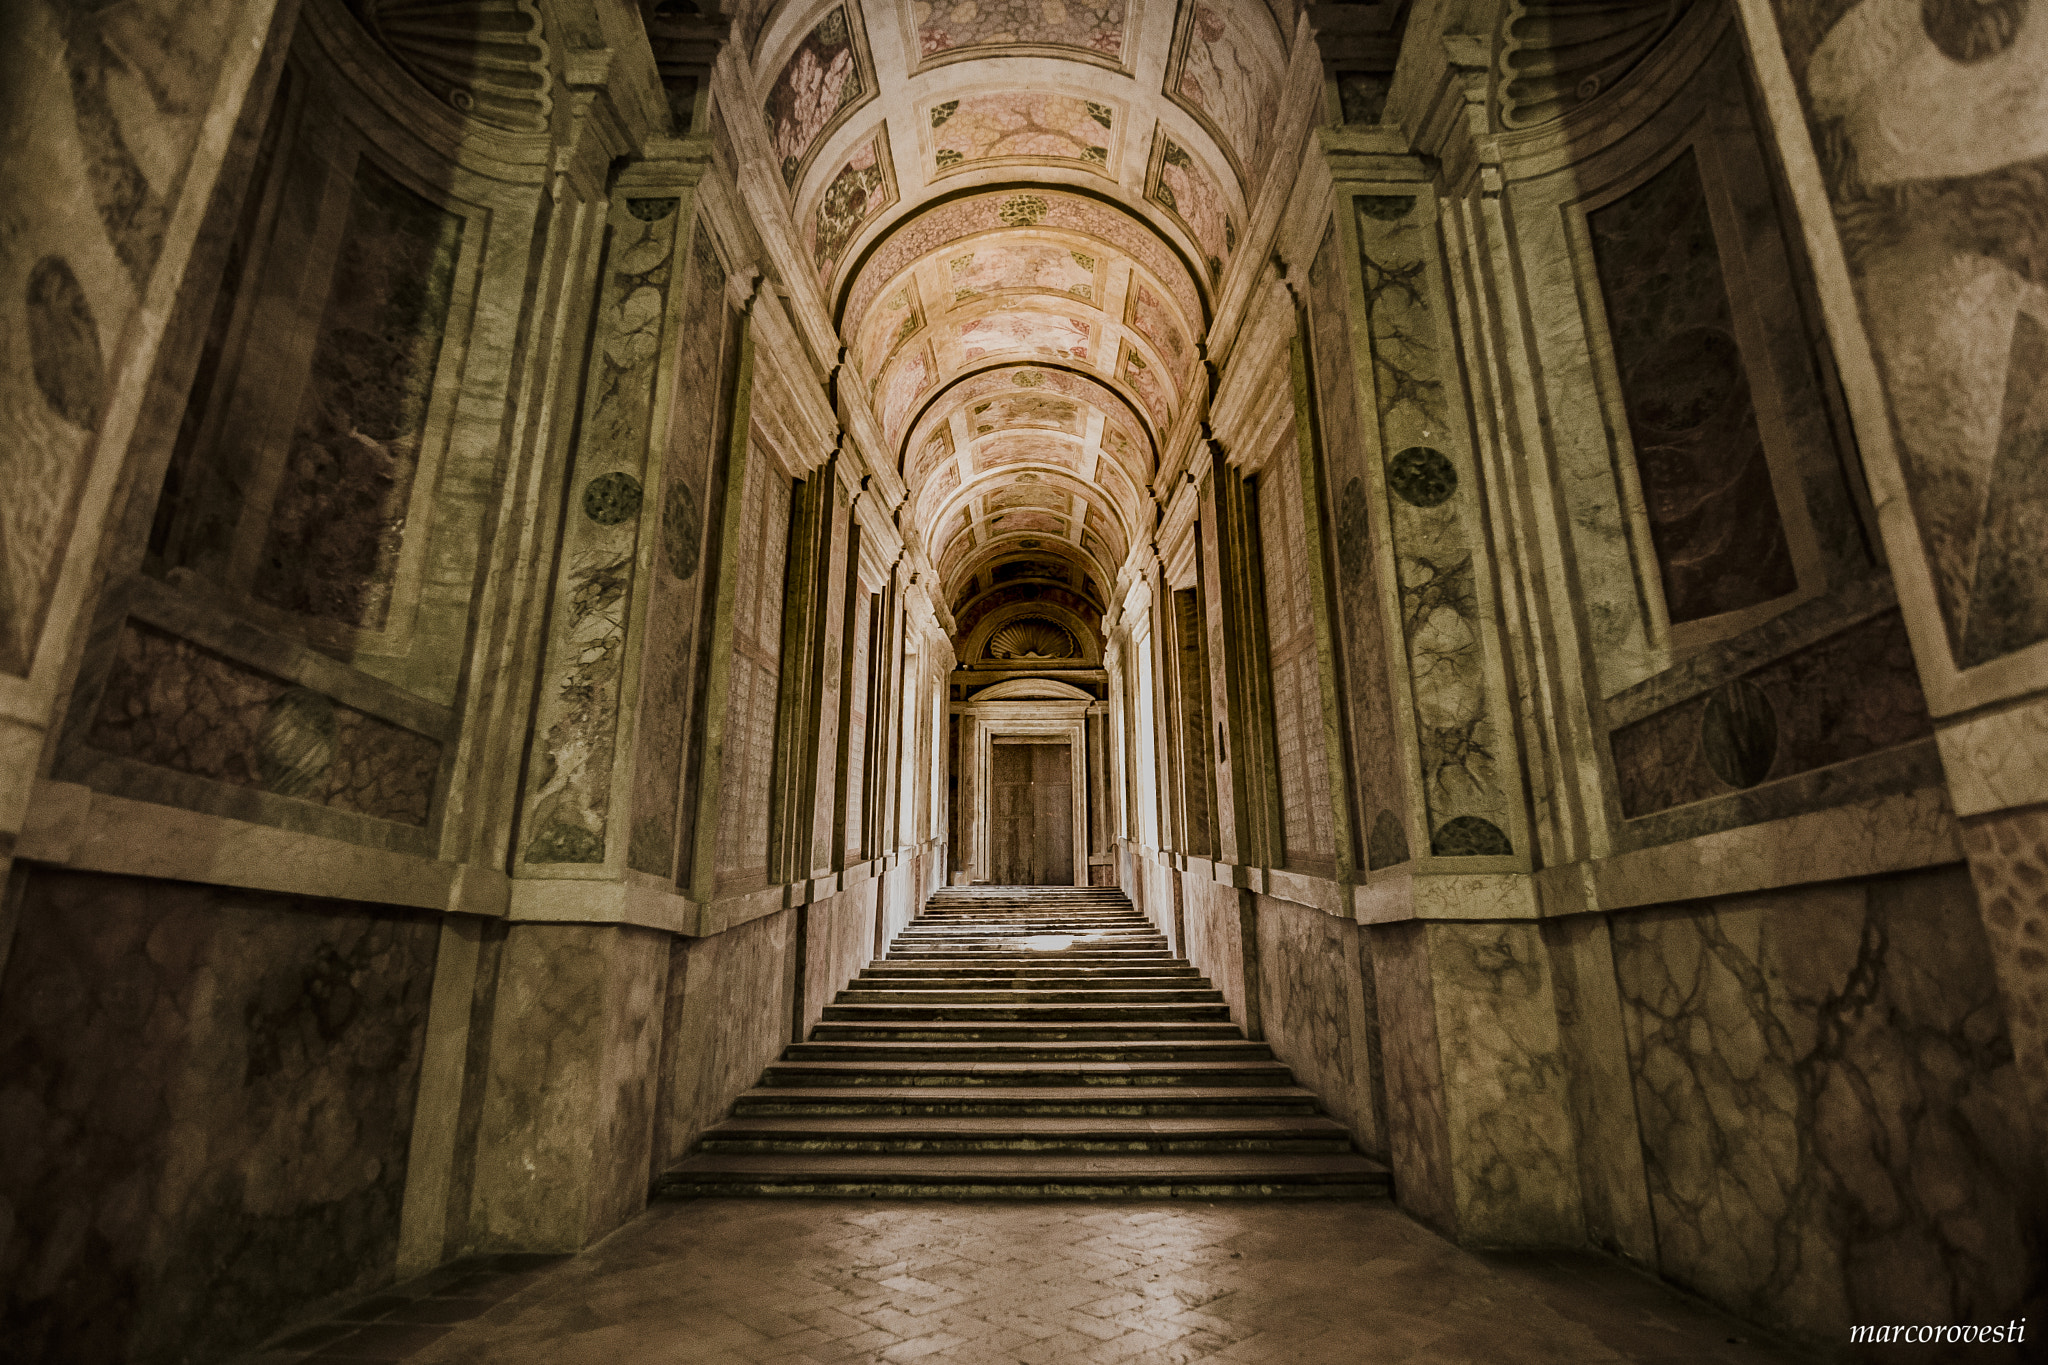 Nikon D3300 + Tokina AT-X 11-20 F2.8 PRO DX (AF 11-20mm f/2.8) sample photo. Interior palace staircase photography